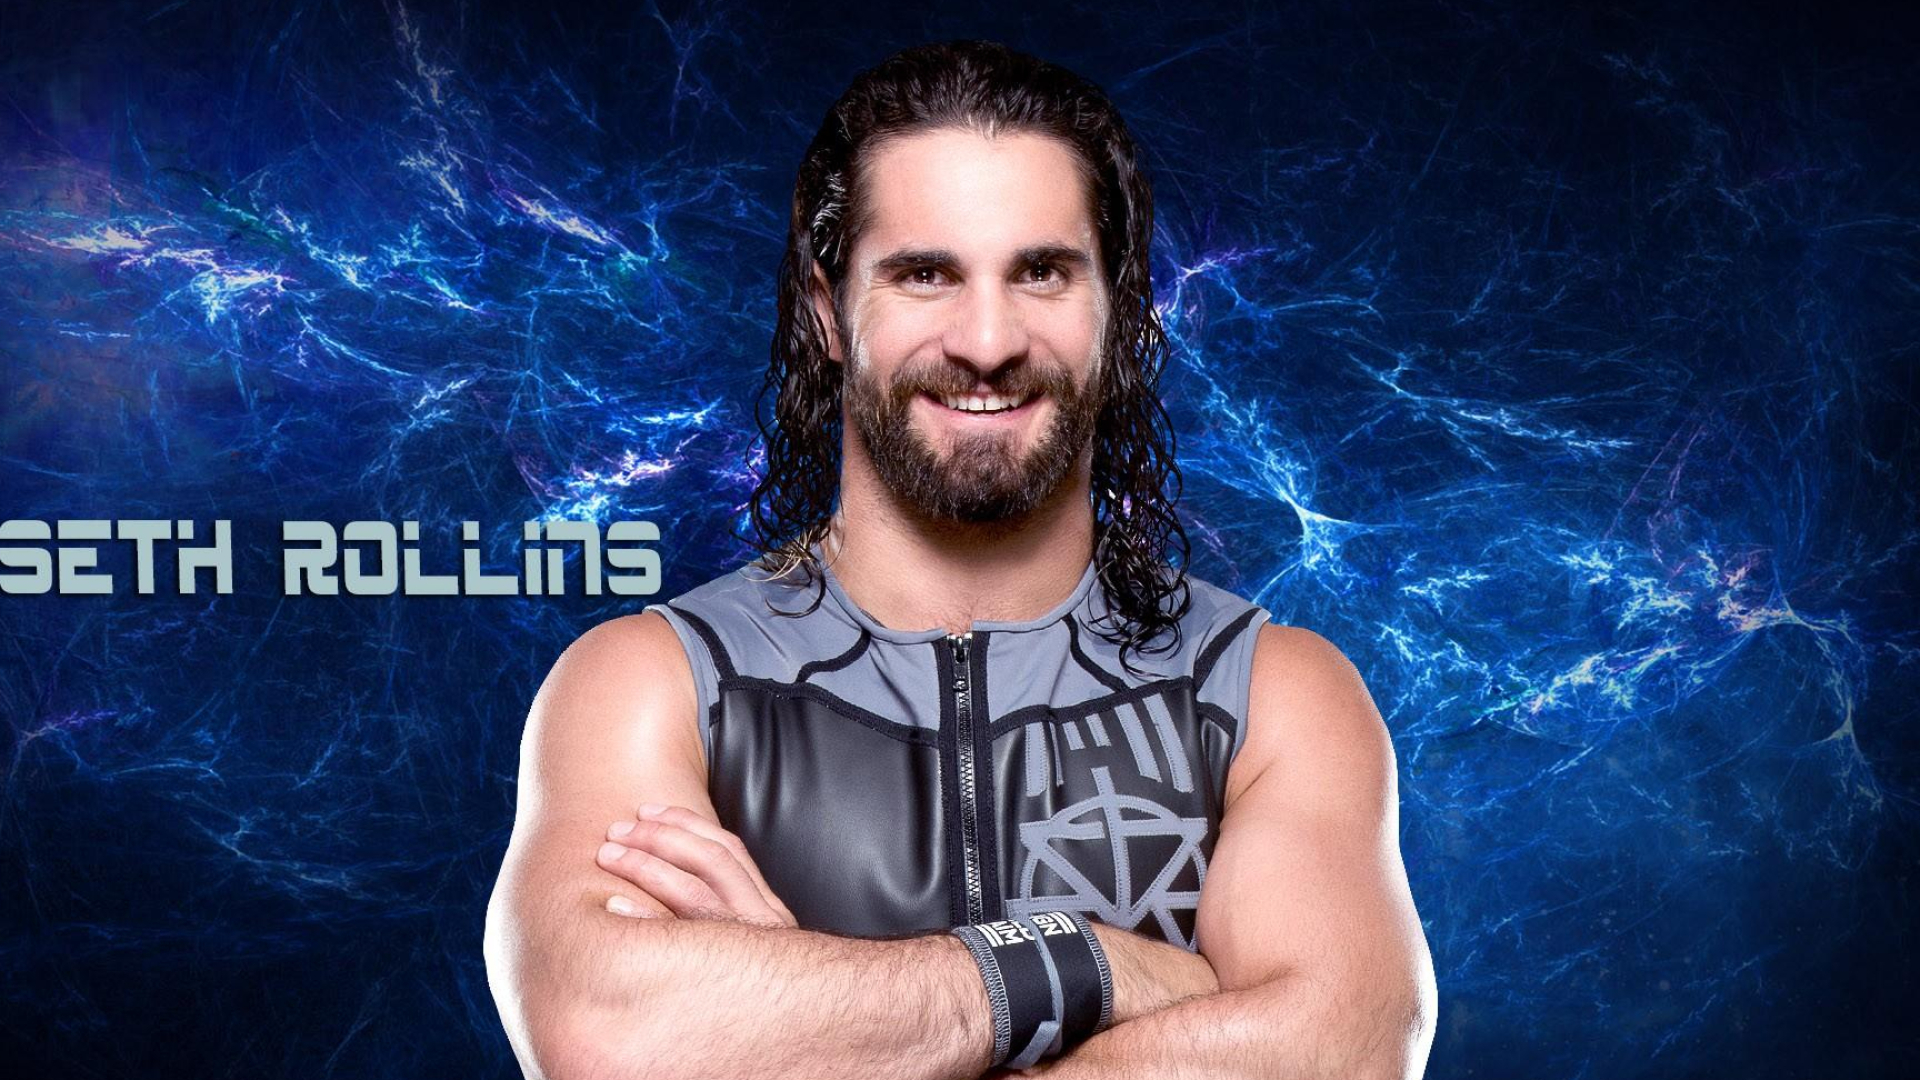 1920x1080 Seth Rollins 2019 Wallpapers